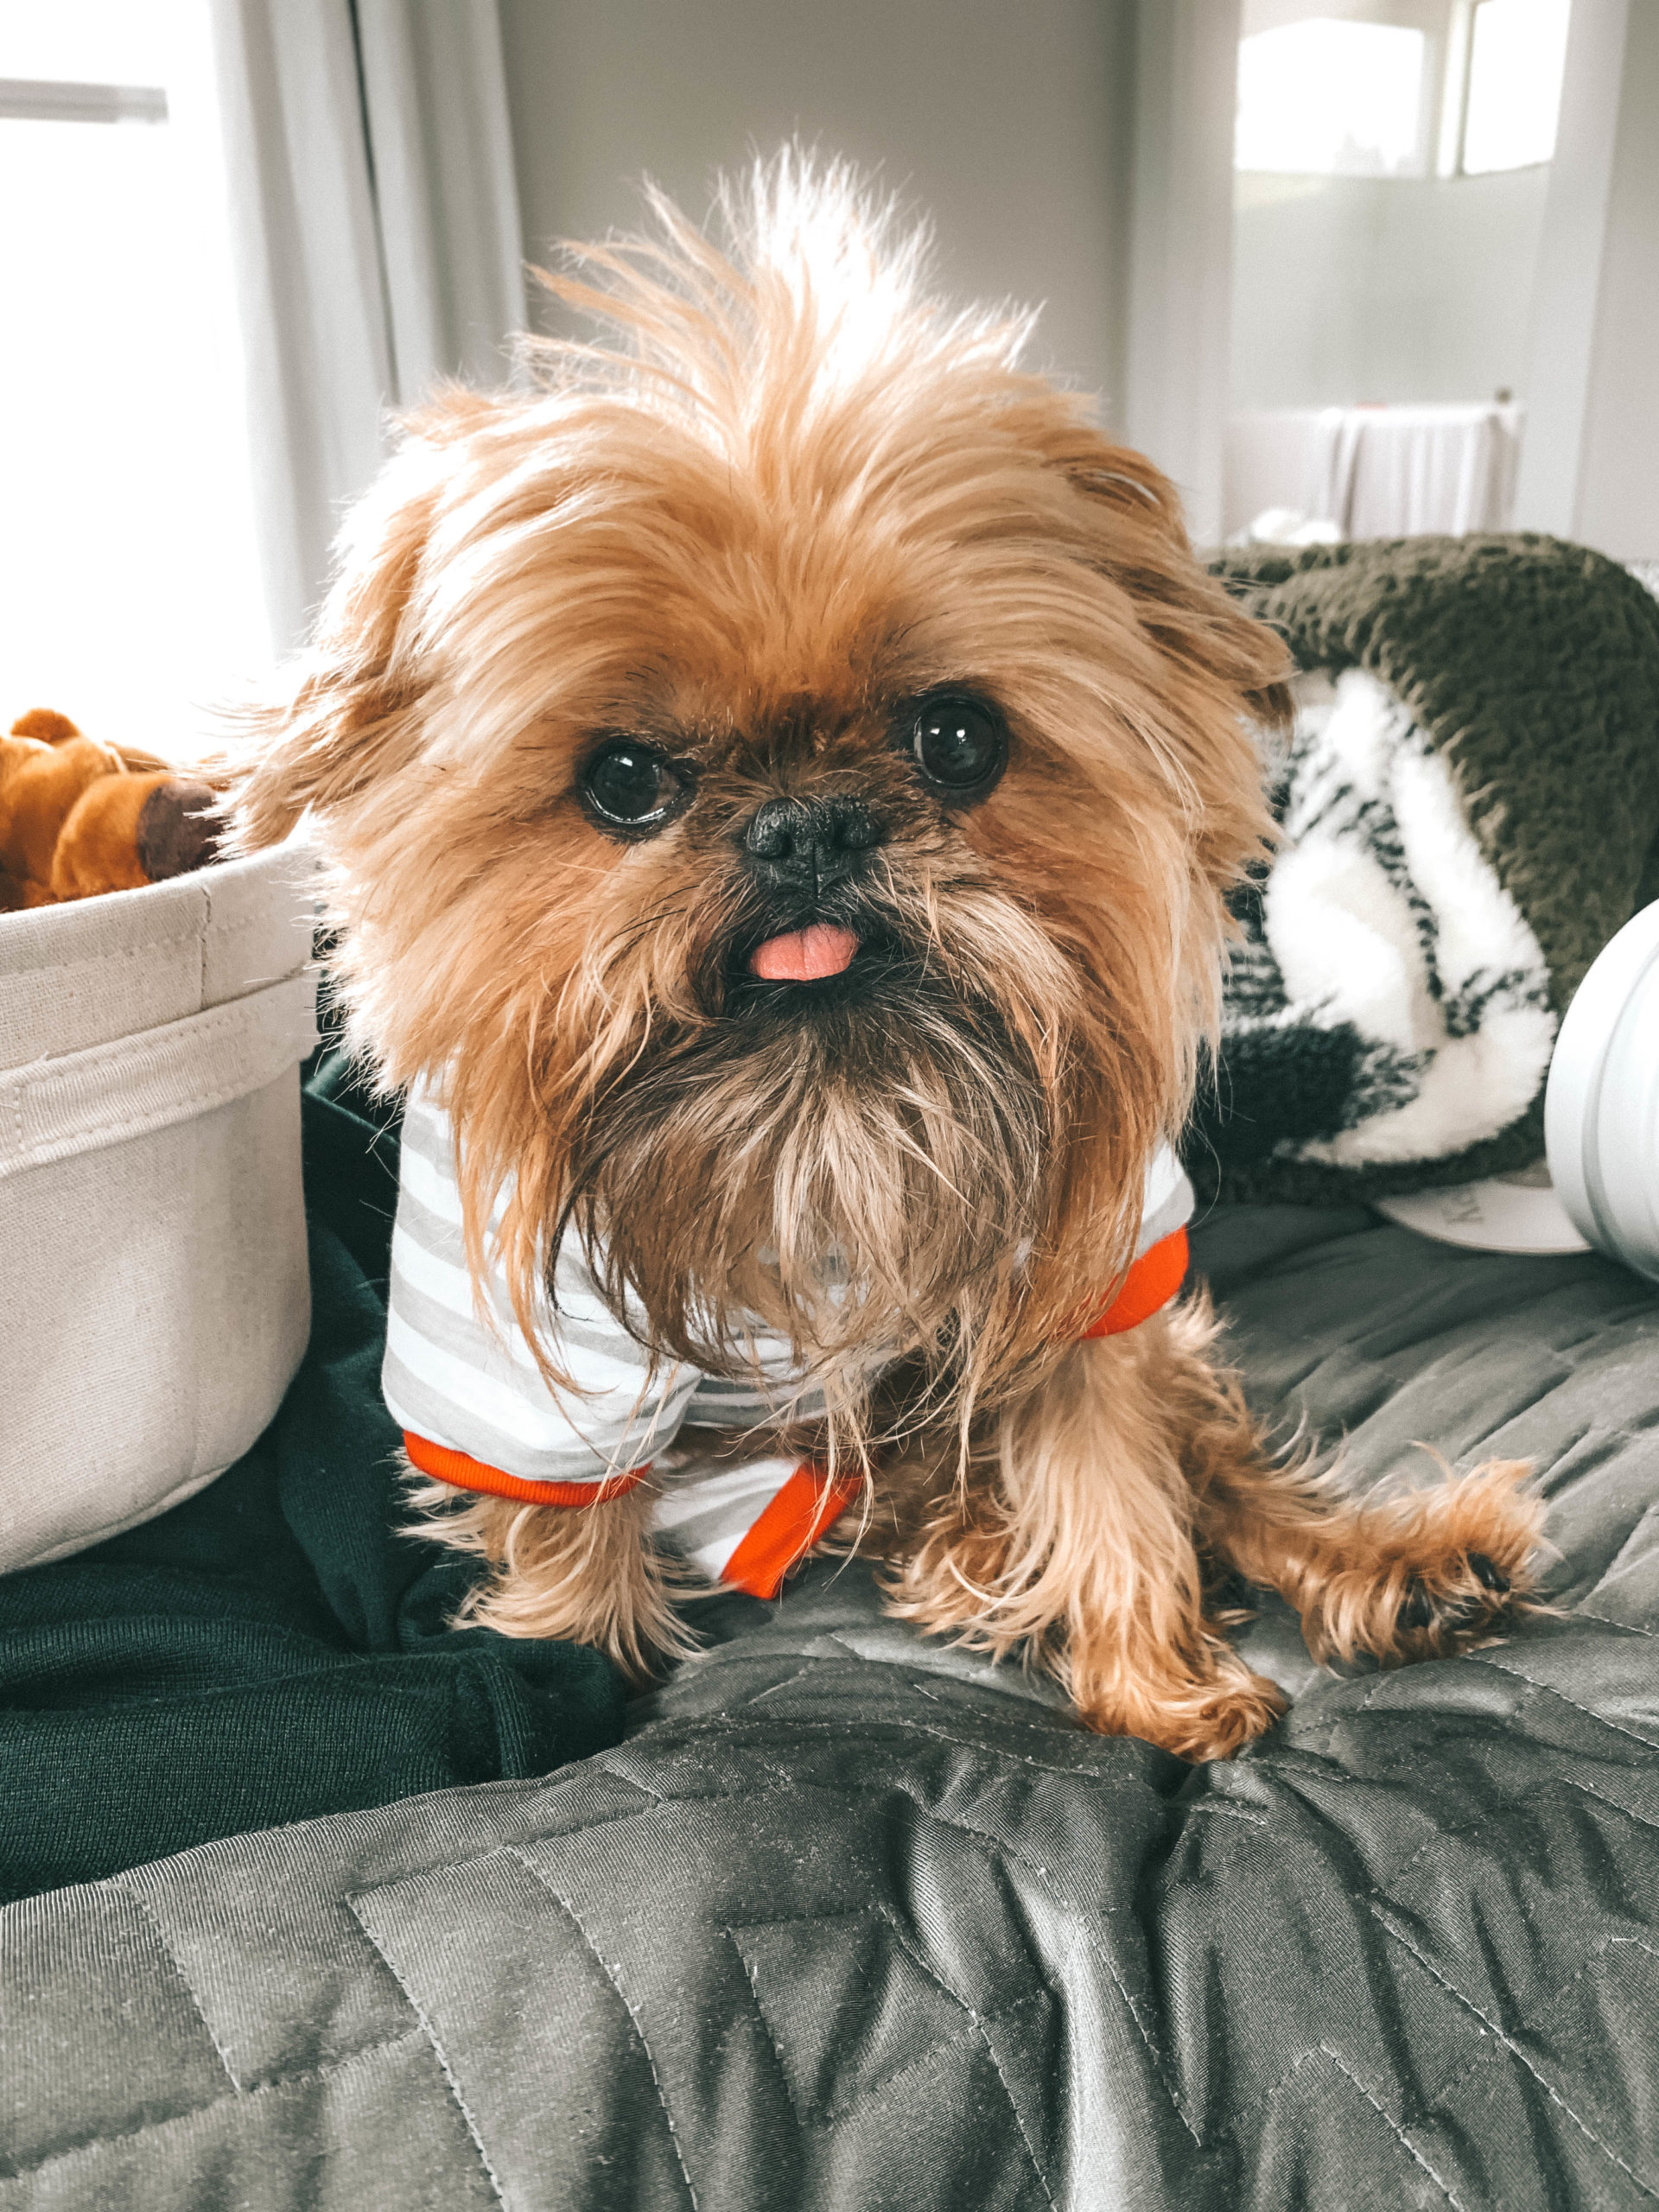 How to Pamper Your Pet by popular Nashville life and style blog, Dressed to Kill: image of a dog wearing a stripped outfit from Tuesday Morning and sitting on a grey blanket. 